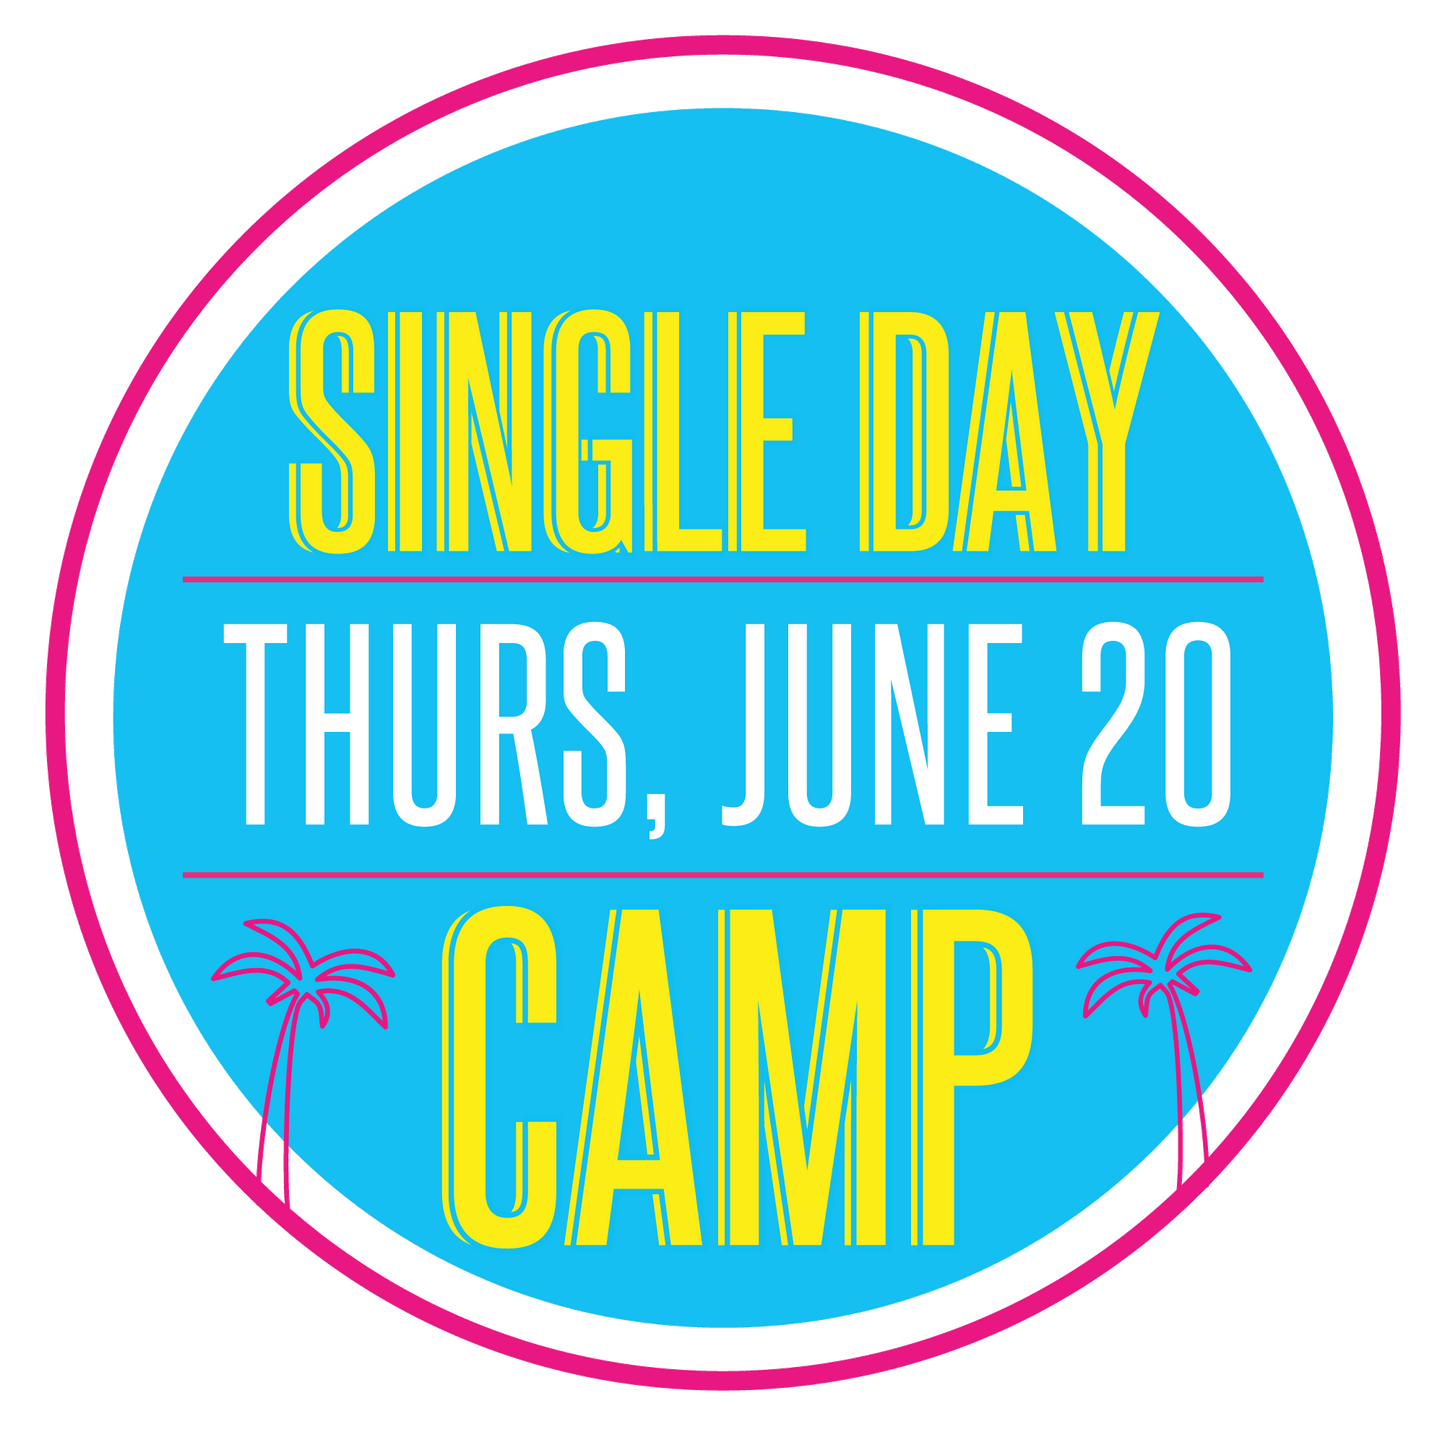 Single Day Sewing Workshop: Thursday, June 20, 9am-3pm